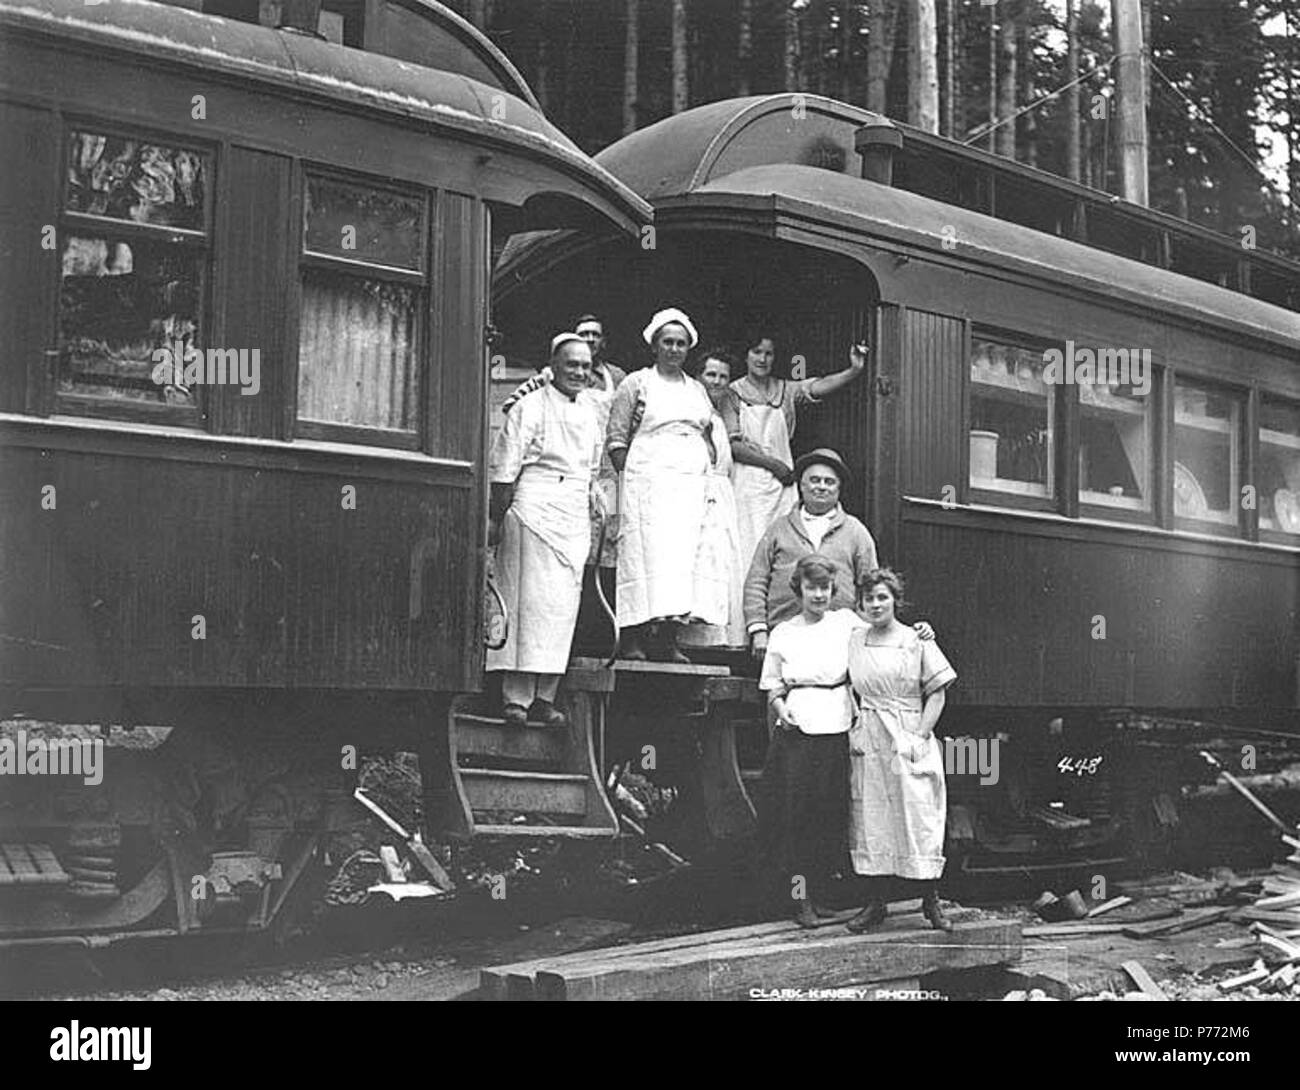 . English: Crew outside kitchen and mess hall cars, Northern Coast Timber Company, ca. 1911 . English: Caption on image: 448 PH Coll 516.2355 Northern Coast Timber Company was in business ca. 1907 to ca. 1915, with logging operations at Kangley and then at Maple Valley. Kangley is a community on a small tributary of the Green River, eleven miles northeast of Issaquah in southwest King County. It was named by the Northern Pacific Railway for John Kangley, general manager of Northern Pacific Coal Company in 1889. Alternate names were Kangley Junction and Durham Junction. A railroad depot was bui Stock Photo